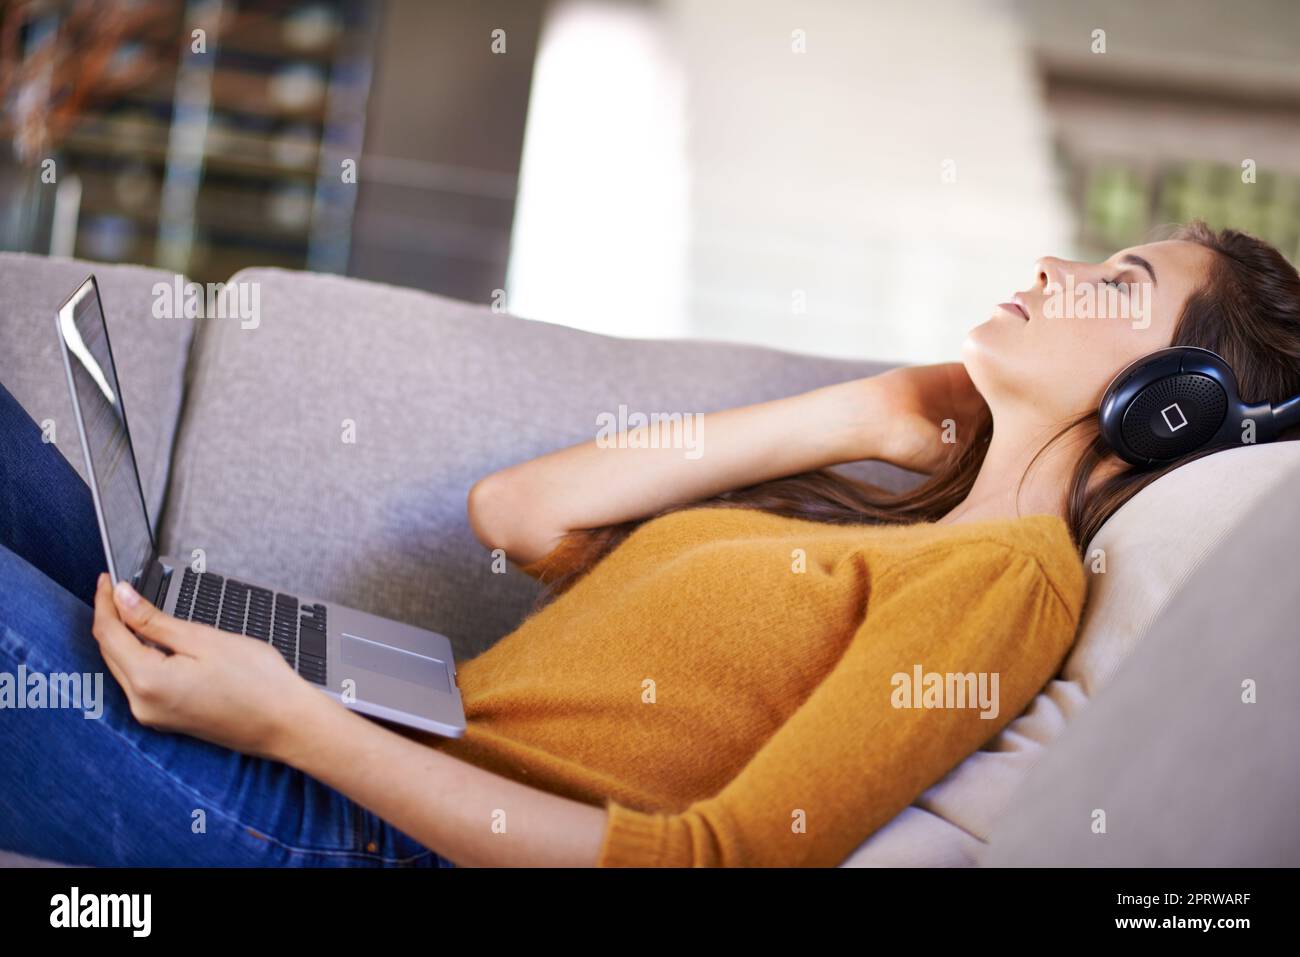 Her favorite pastime. An attractive young woman listening to music while napping. Stock Photo